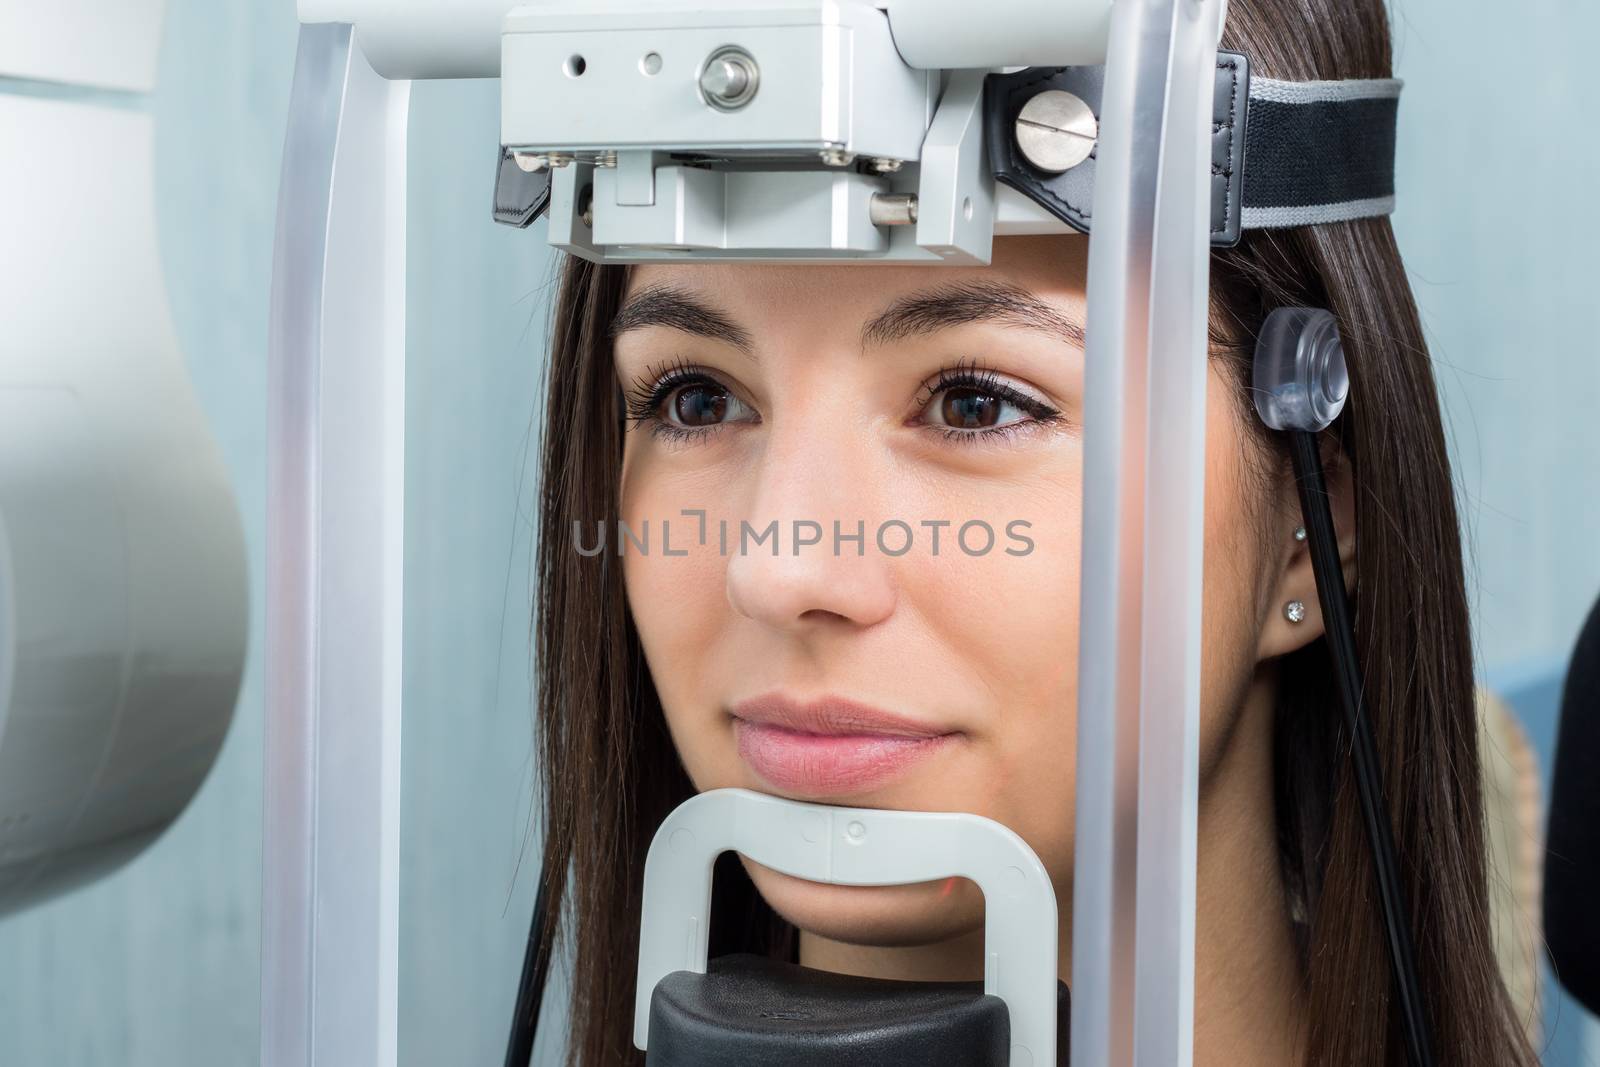 Close up face shot of girl with head positioned in cephalometric panorama x-ray machine.